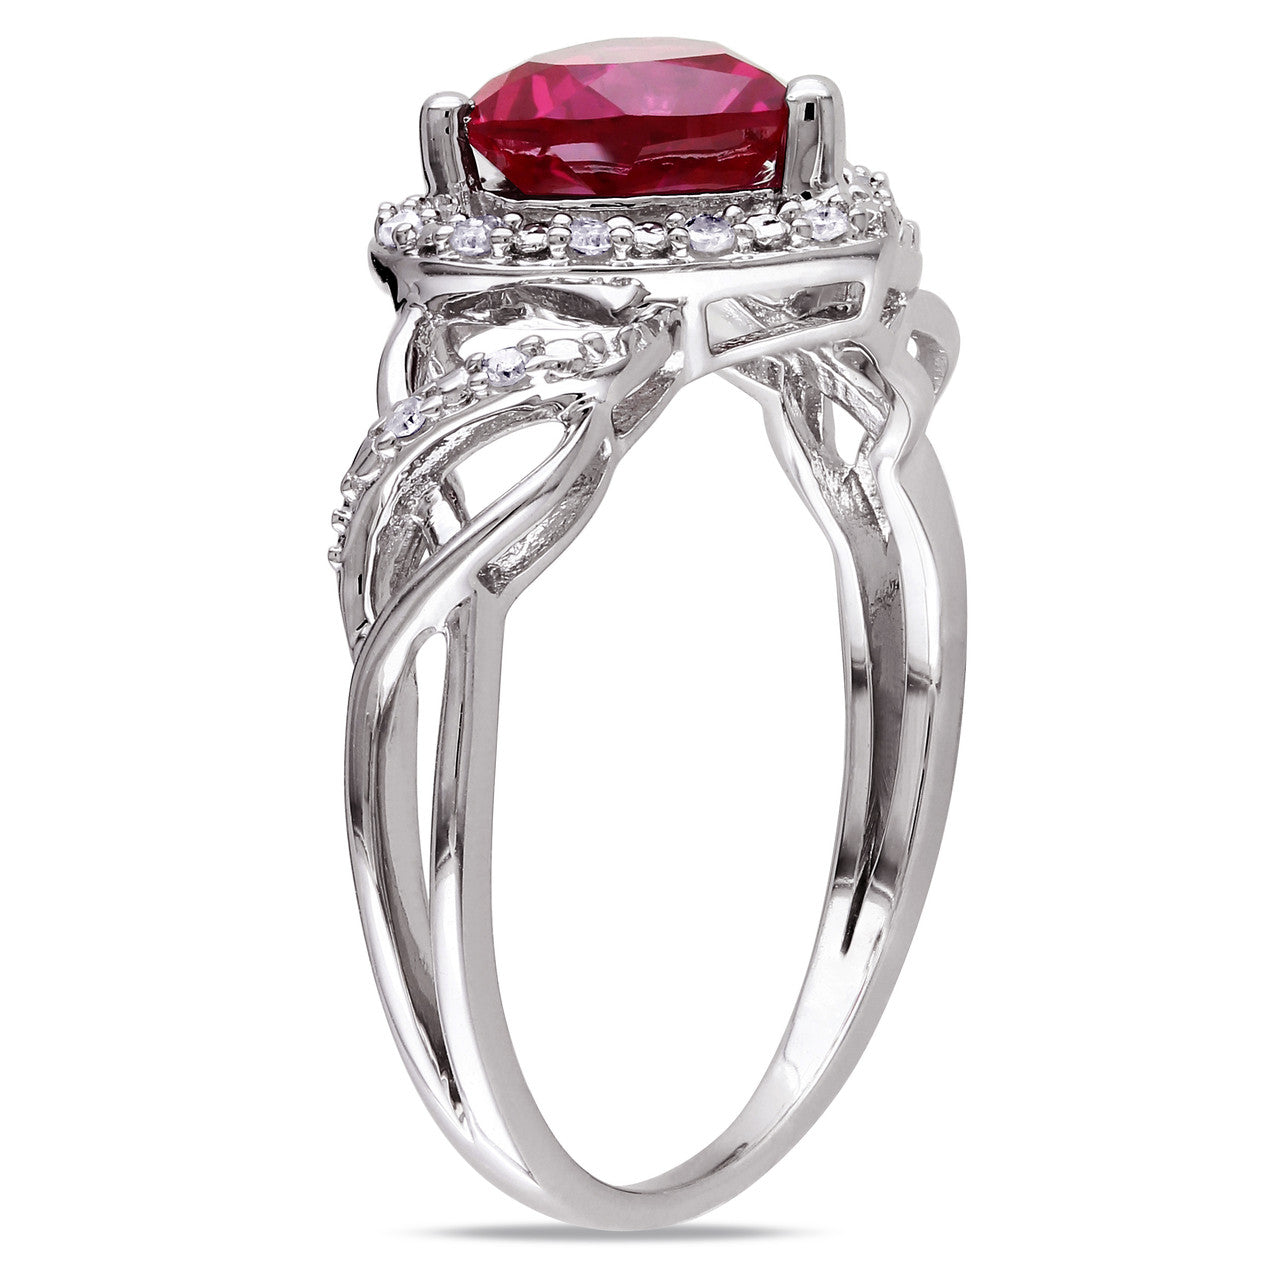 Ice Jewellery 1/10 CT Diamond TW and 1 5/8 CT TGW Created Ruby Fashion Ring in Sterling Silver - 75000004867 | Ice Jewellery Australia